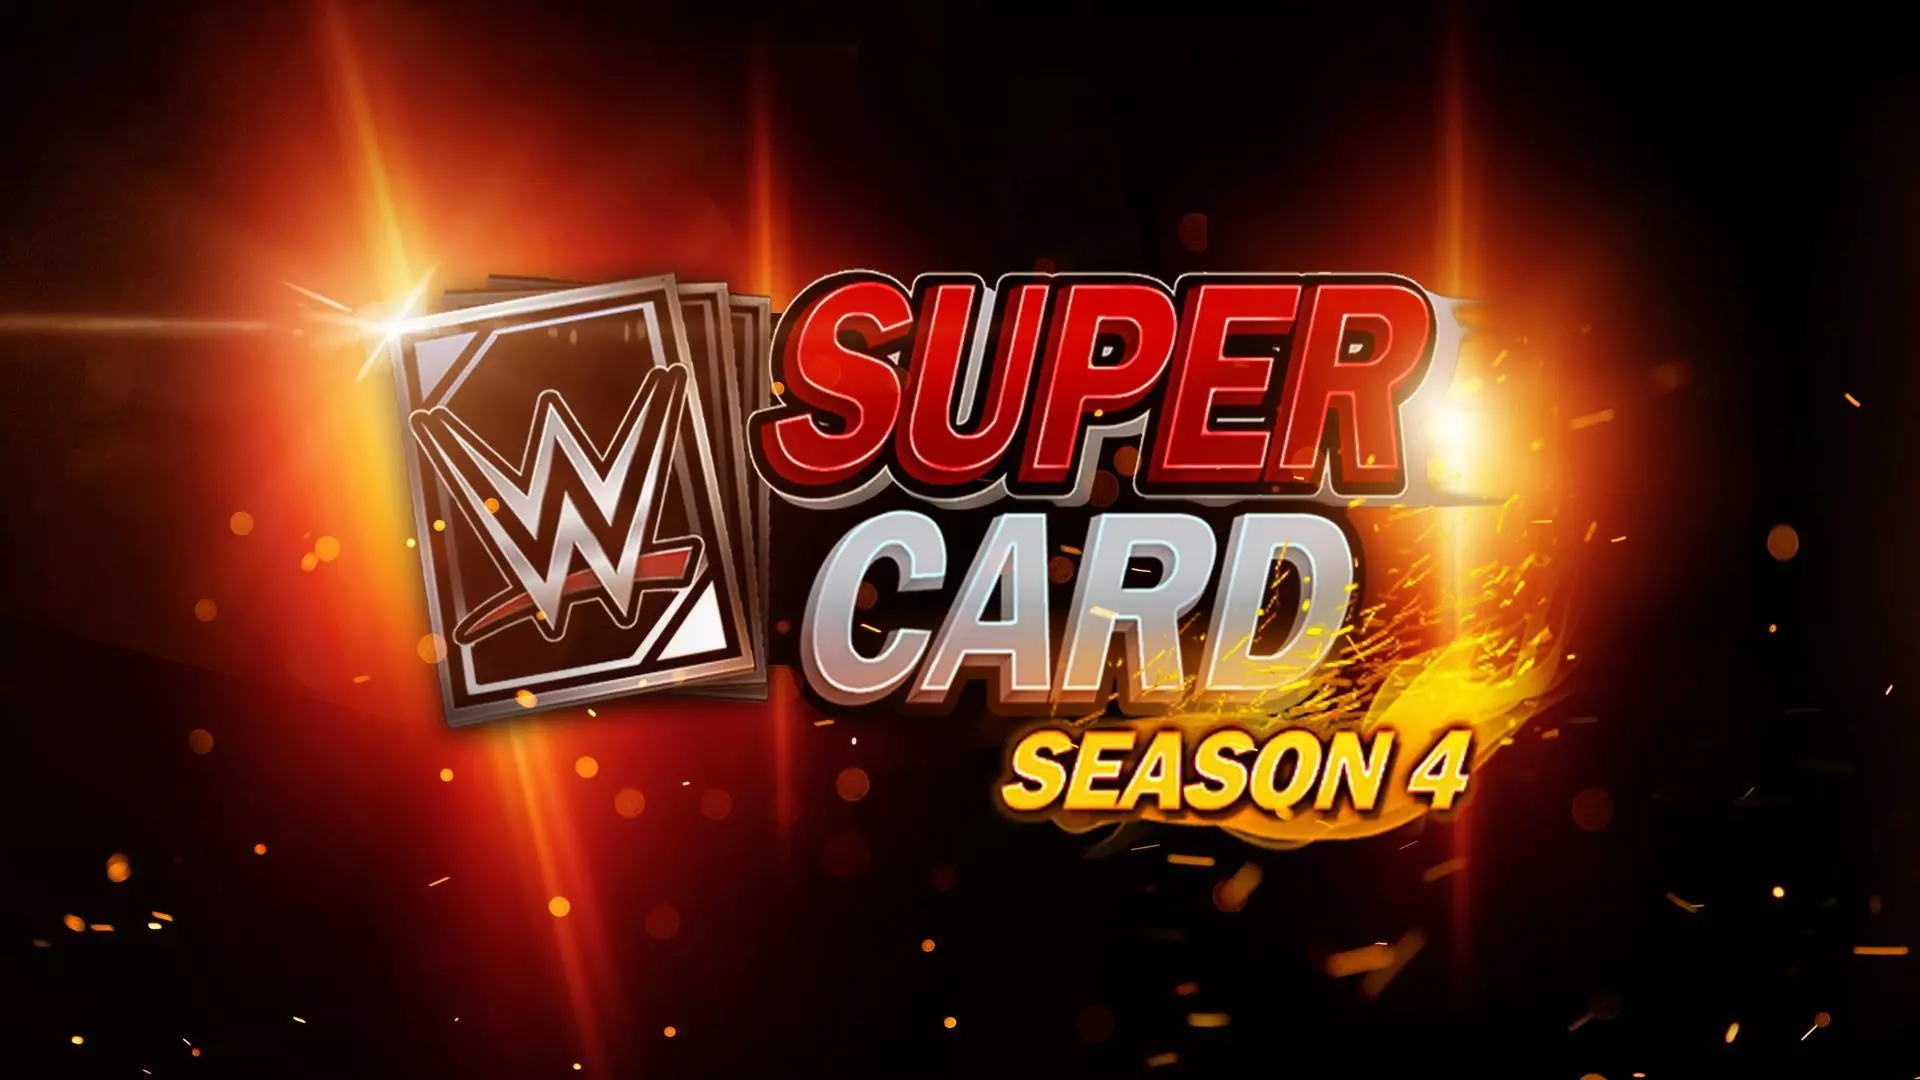 WWE SuperCard Season 4 Update Announced! Coming Soon to iOS & Android